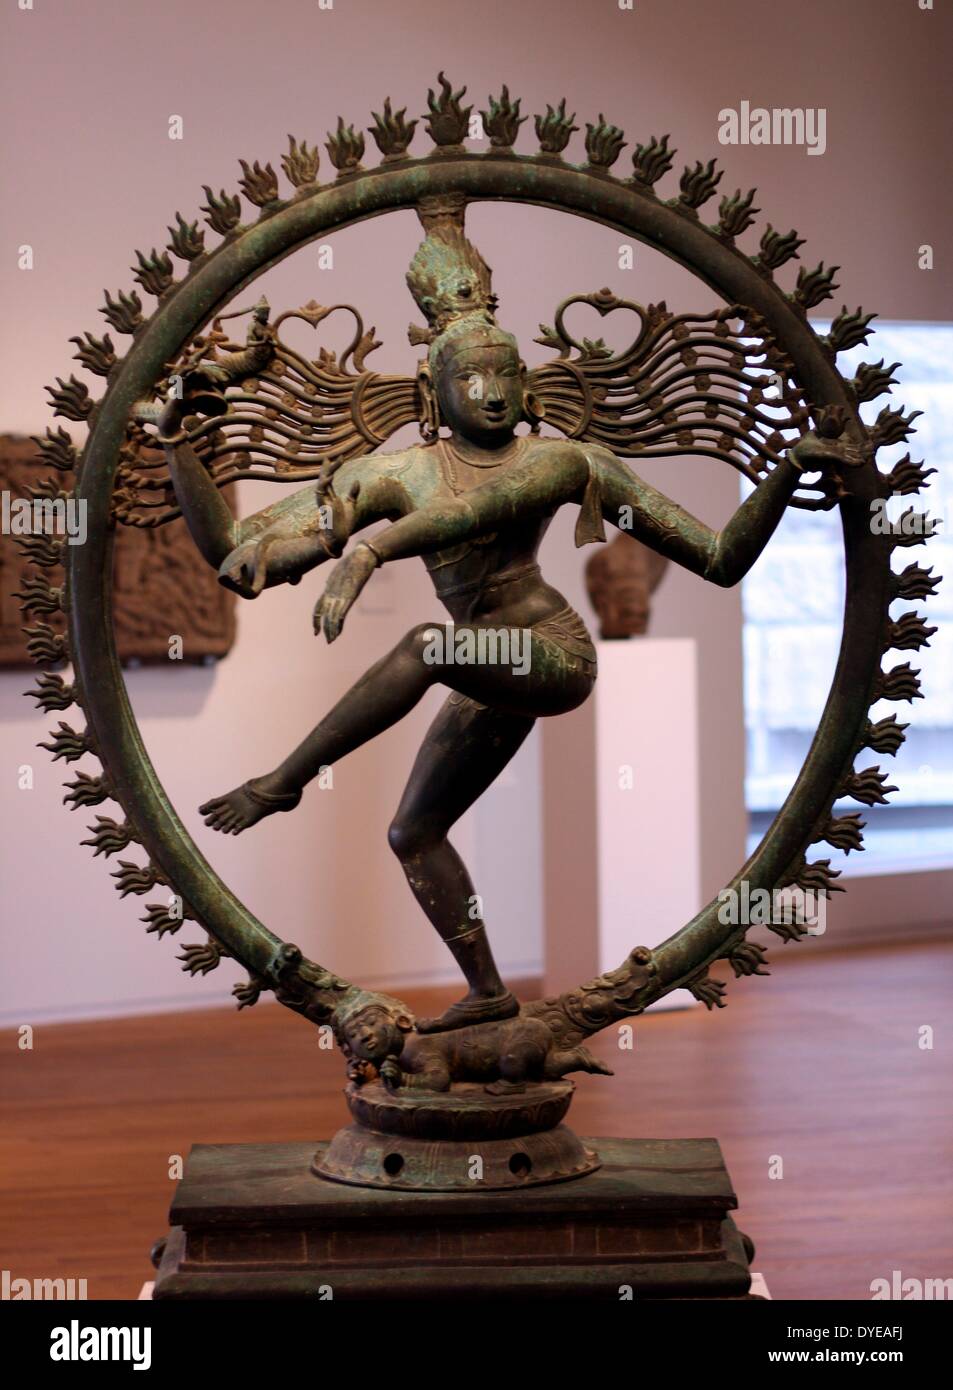 Shiva Nataraja. India, Tamil Nadu Chola style 12th century, bronze. Shiva, in his manifestation as Nataraja (King of Dancers), represented in the anandatandava pose and encircled by a halo of fire, is both the creator and destroyer of the world. Beneath his foot is a dwarf, symbolizing ignorance. Stock Photo